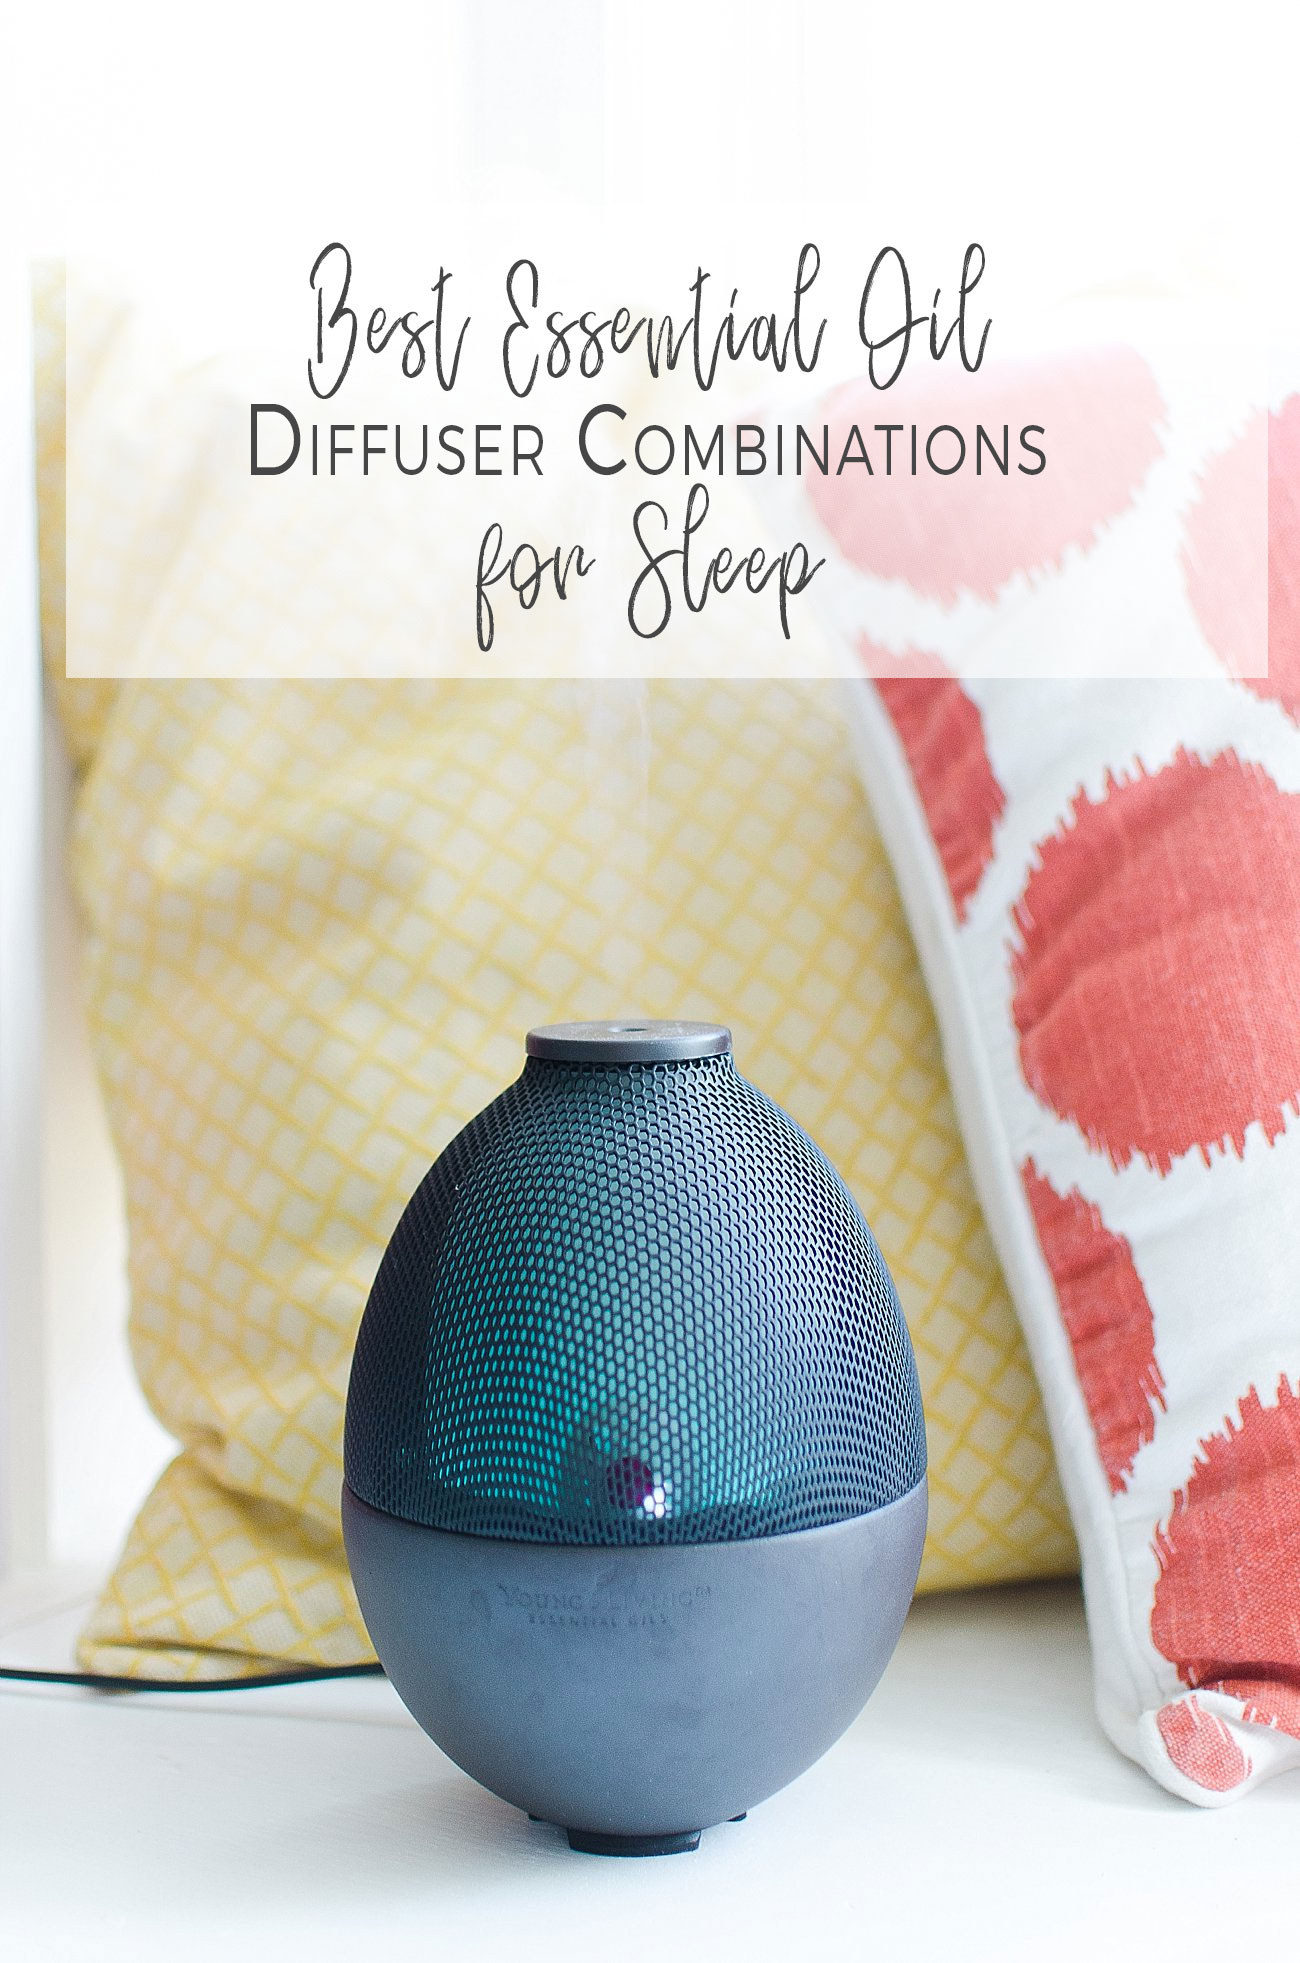 15 of the Best Essential Oil Diffuser Recipes for Sleep by North Carolina ethical blogger Still Being Molly